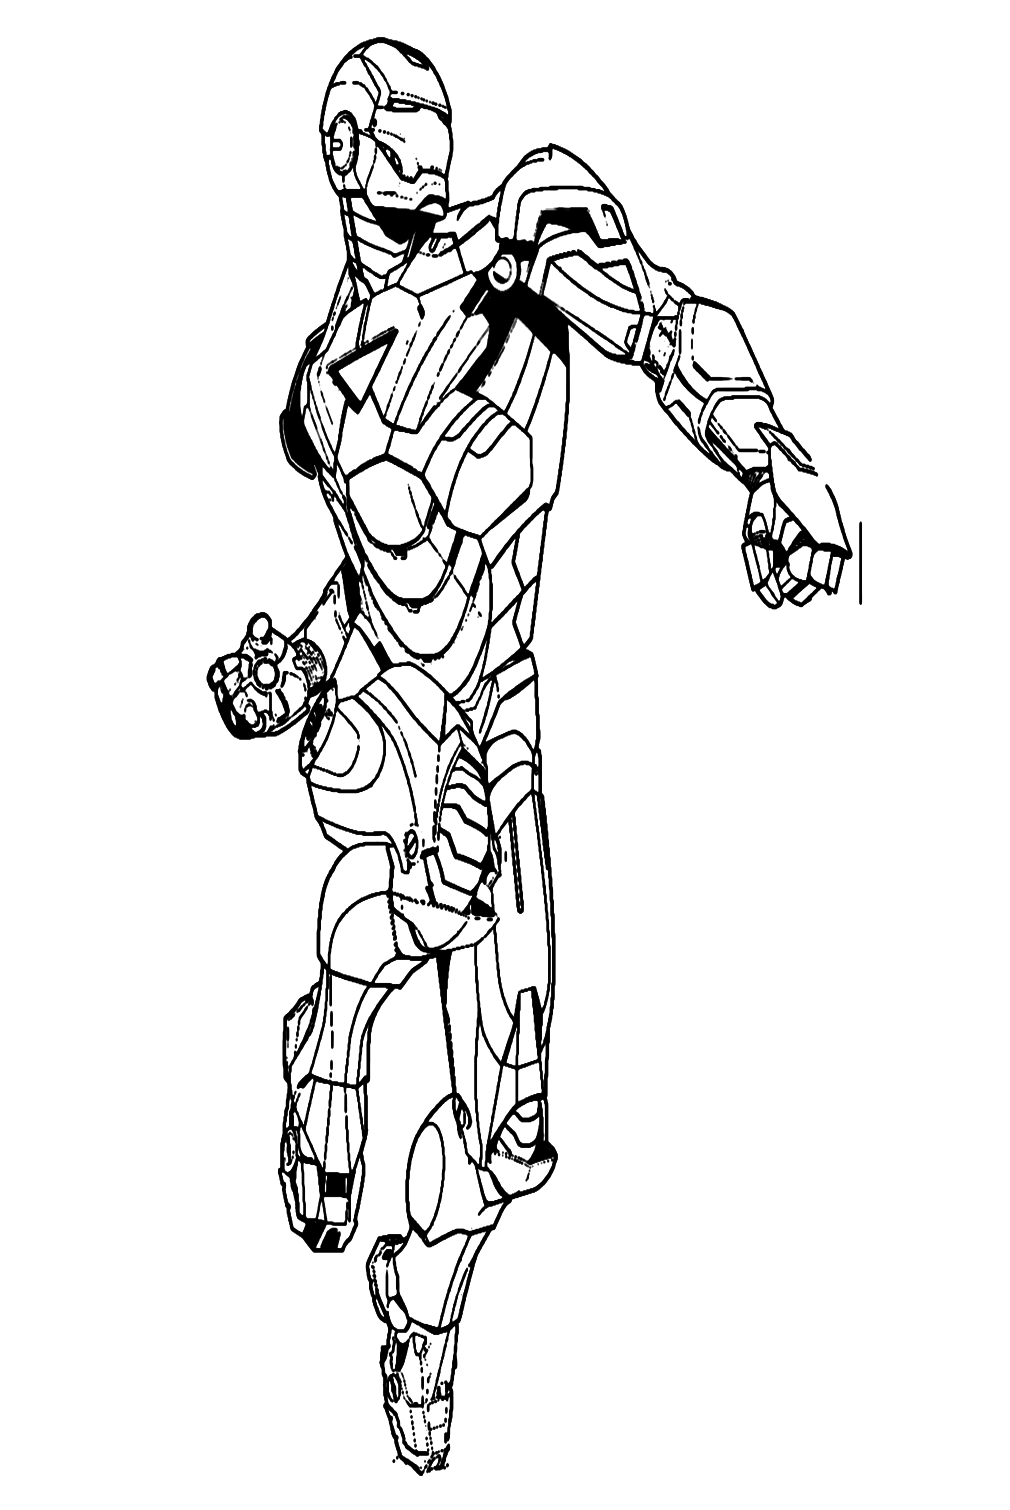 Iron Man Prepares To Jump Up And Hit To The Punch Coloring Pages